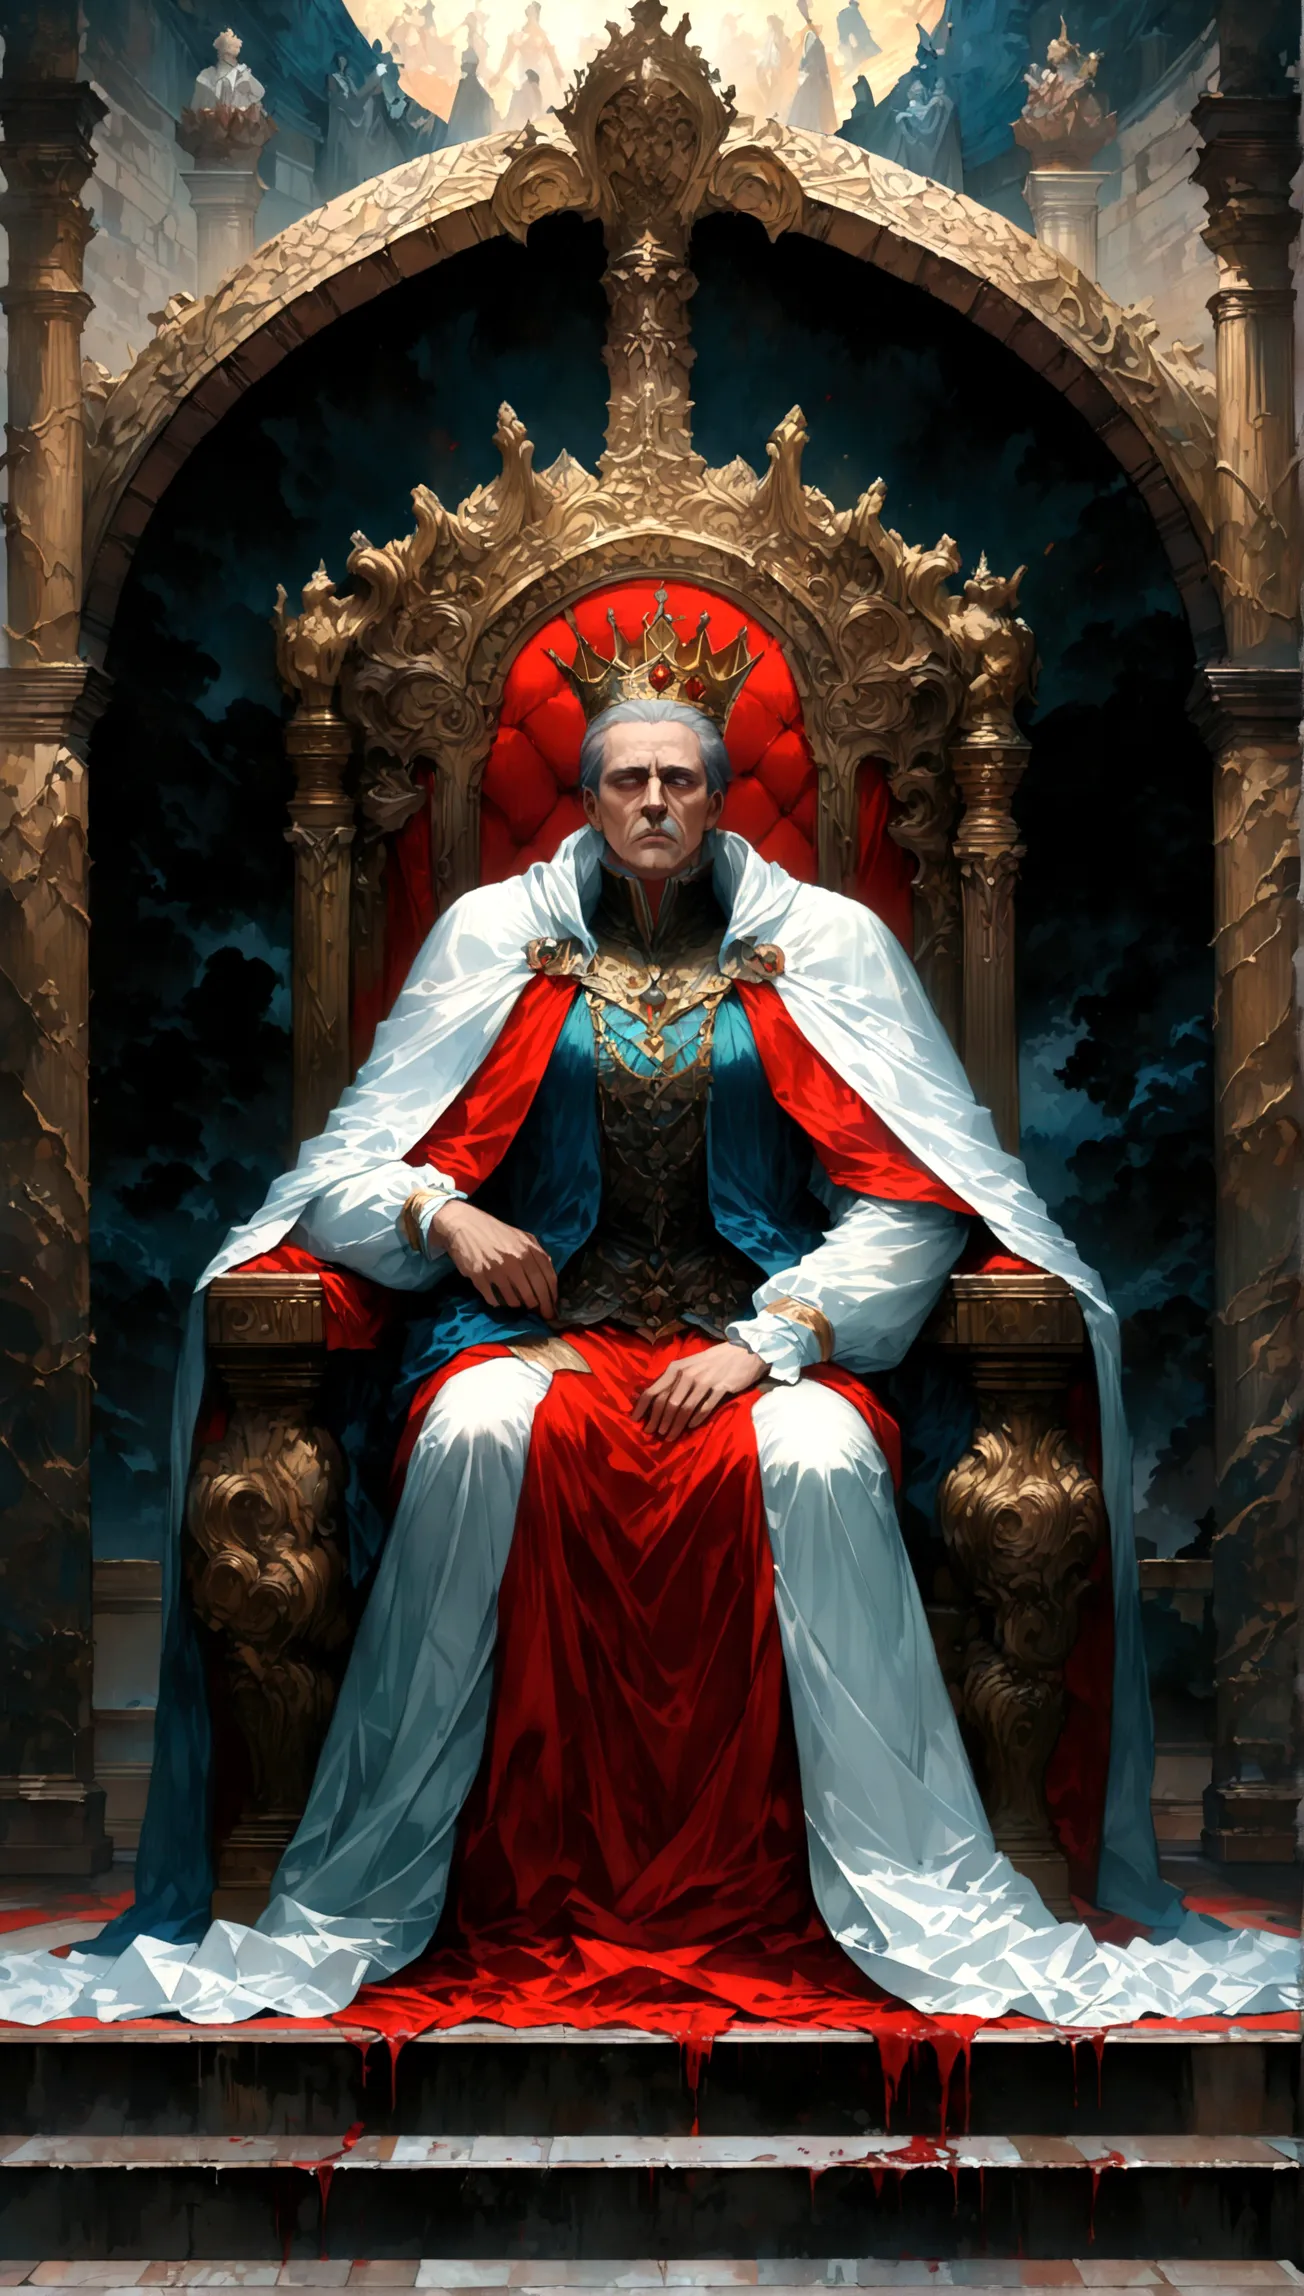 Throne room scenery,oil painting style,Draw the king sitting on the throne in the top half of the image,Draw the subjects prostr...